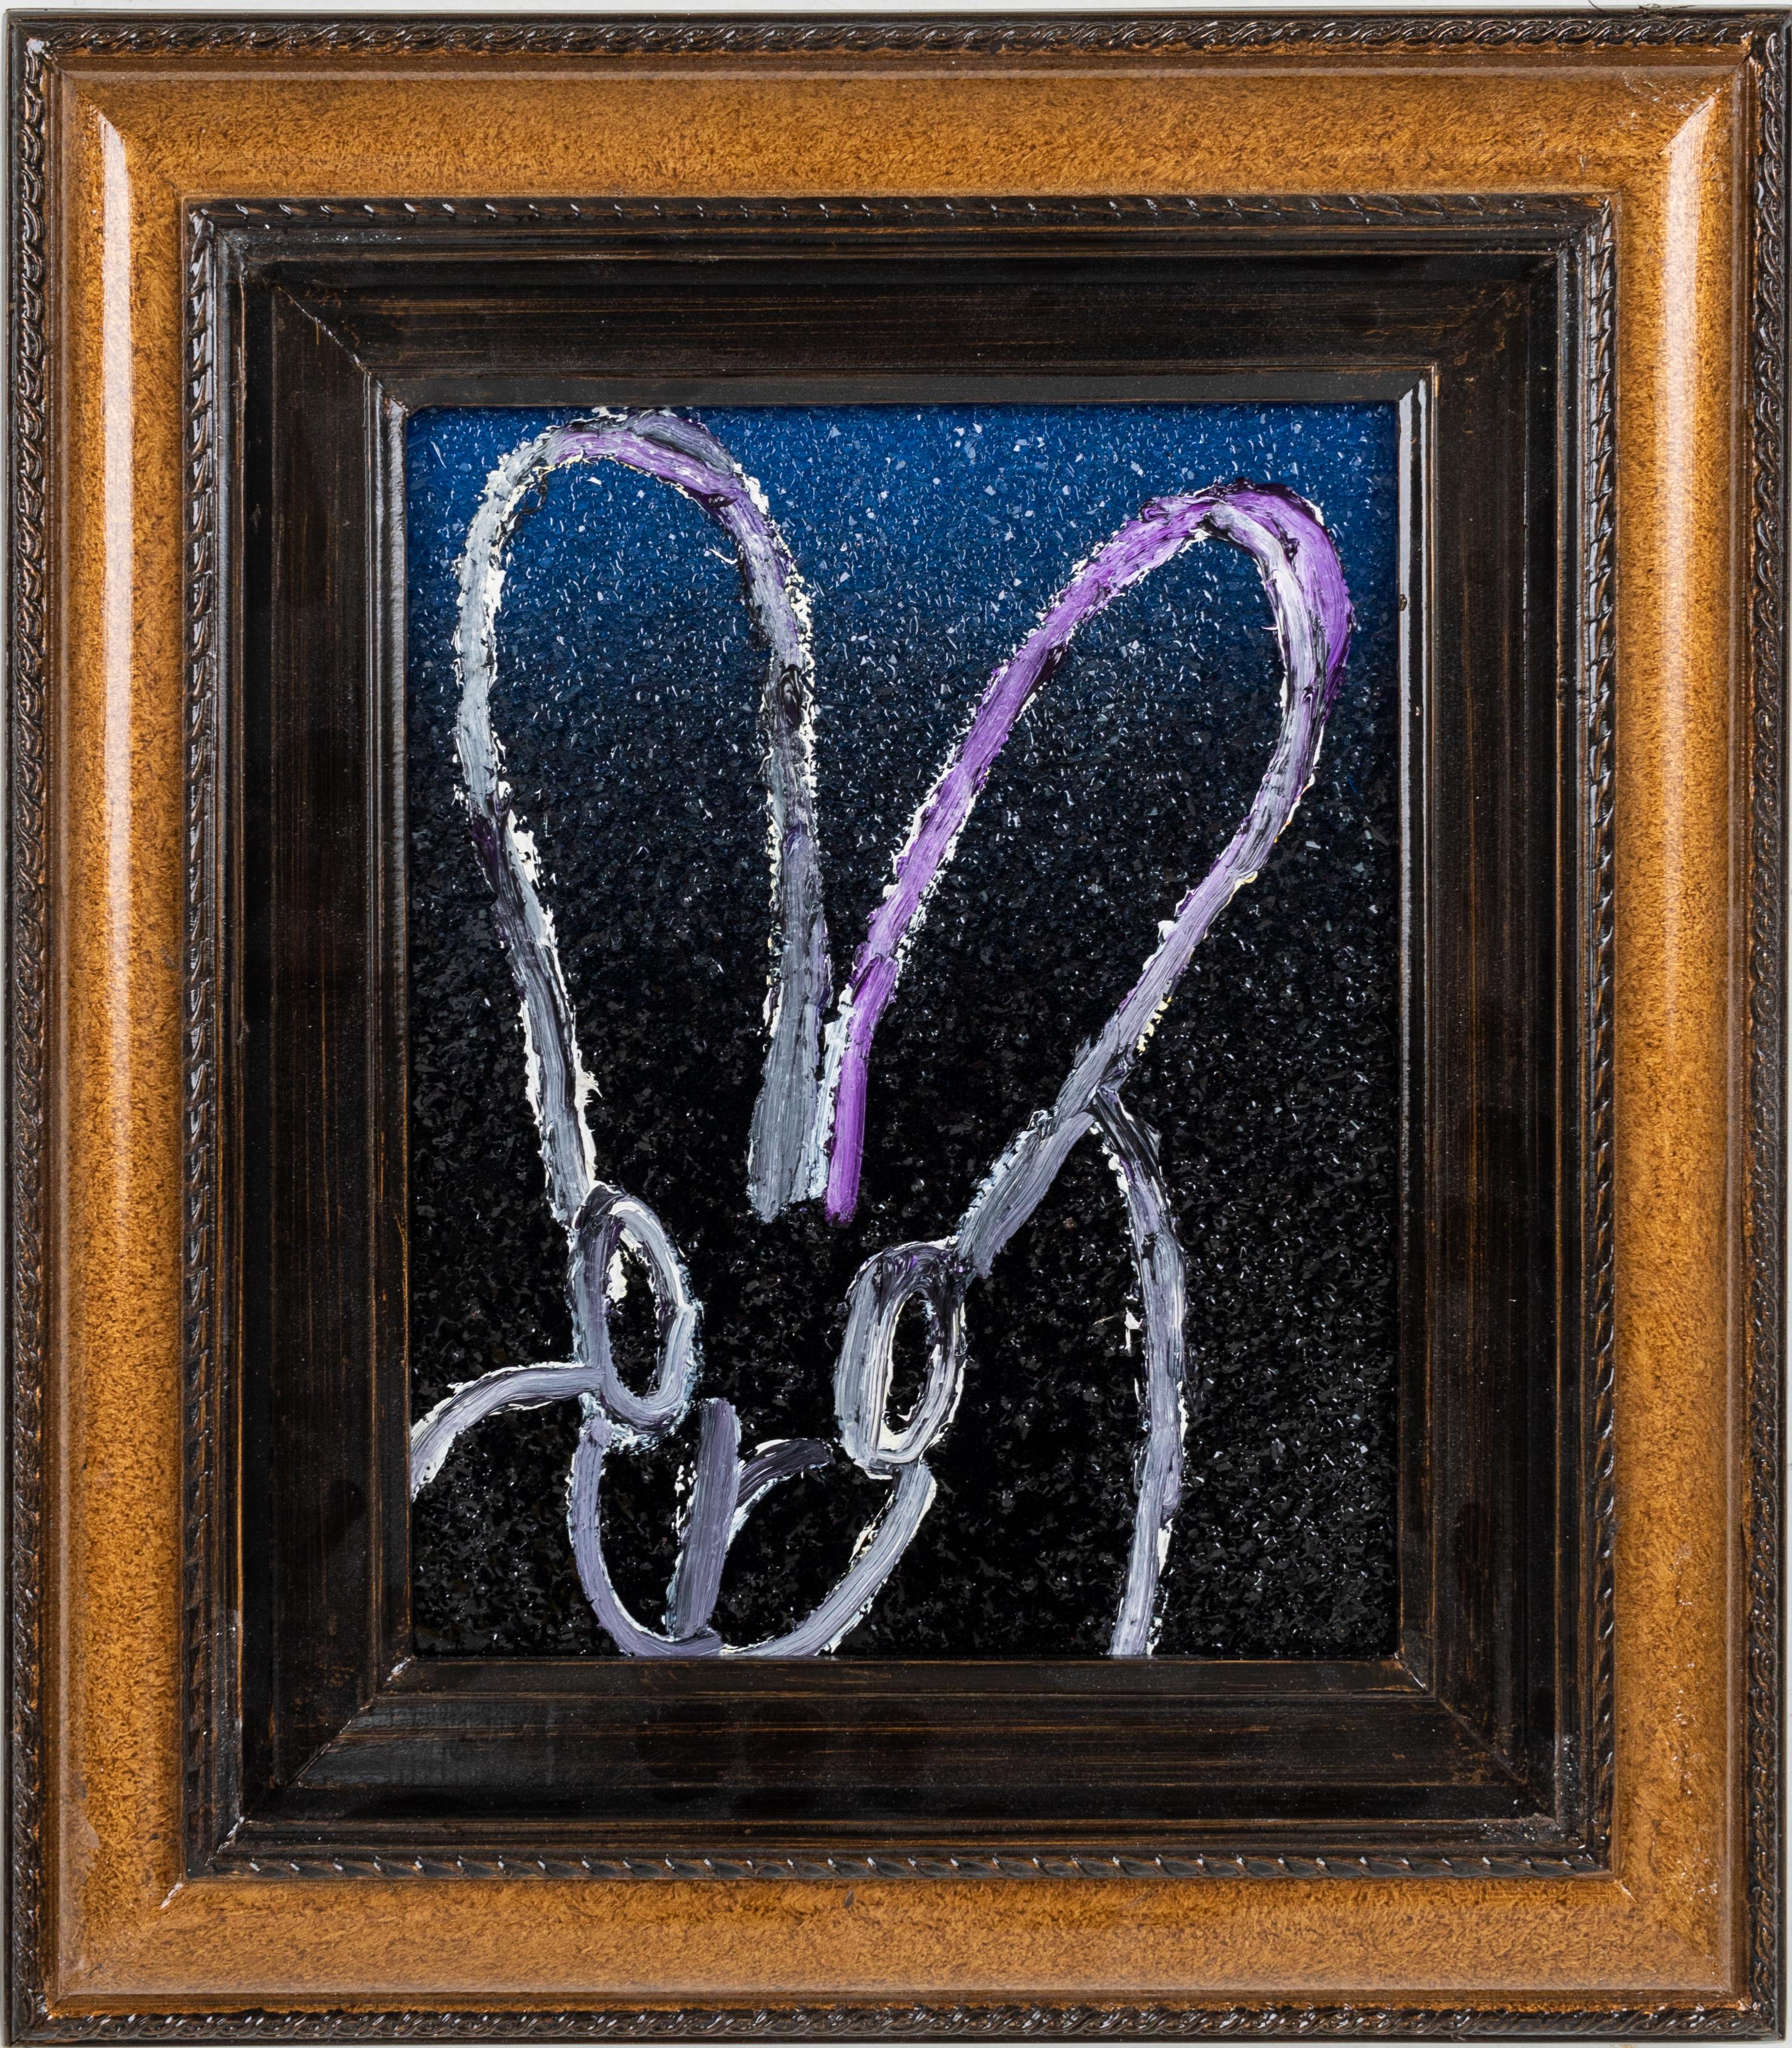 Hunt Slonem "Black Diamond" Dust Bunny
Light grey with a hint of purple gestured bunny on a black ombre diamond dust background in a vintage frame

Unframed: 10 x 8 inches  
Framed: 16 x 14 inches
*Painting is framed - Please note that not all Hunt